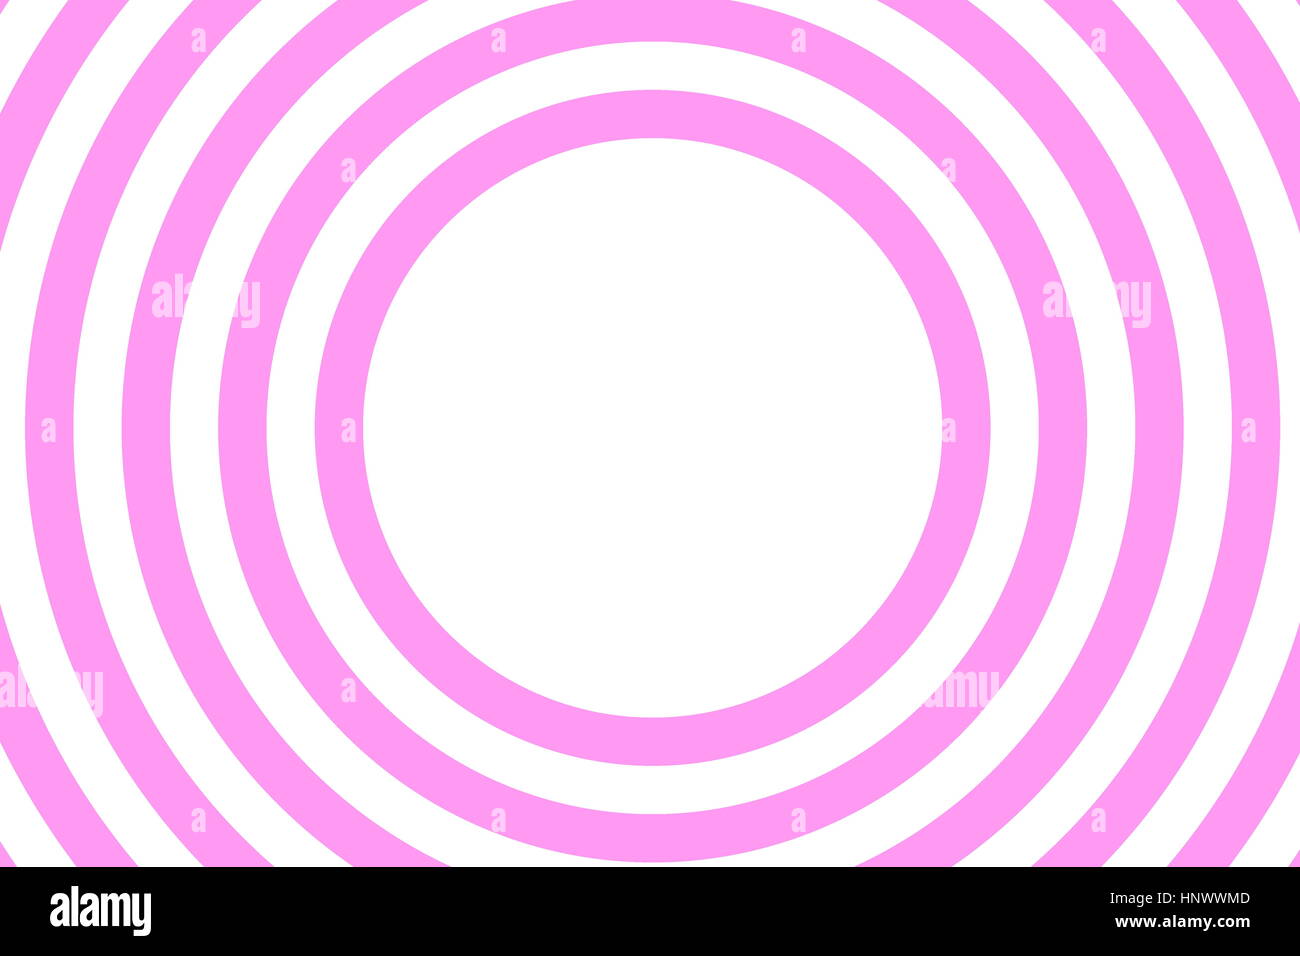 Illustration of concentric circles Stock Photo